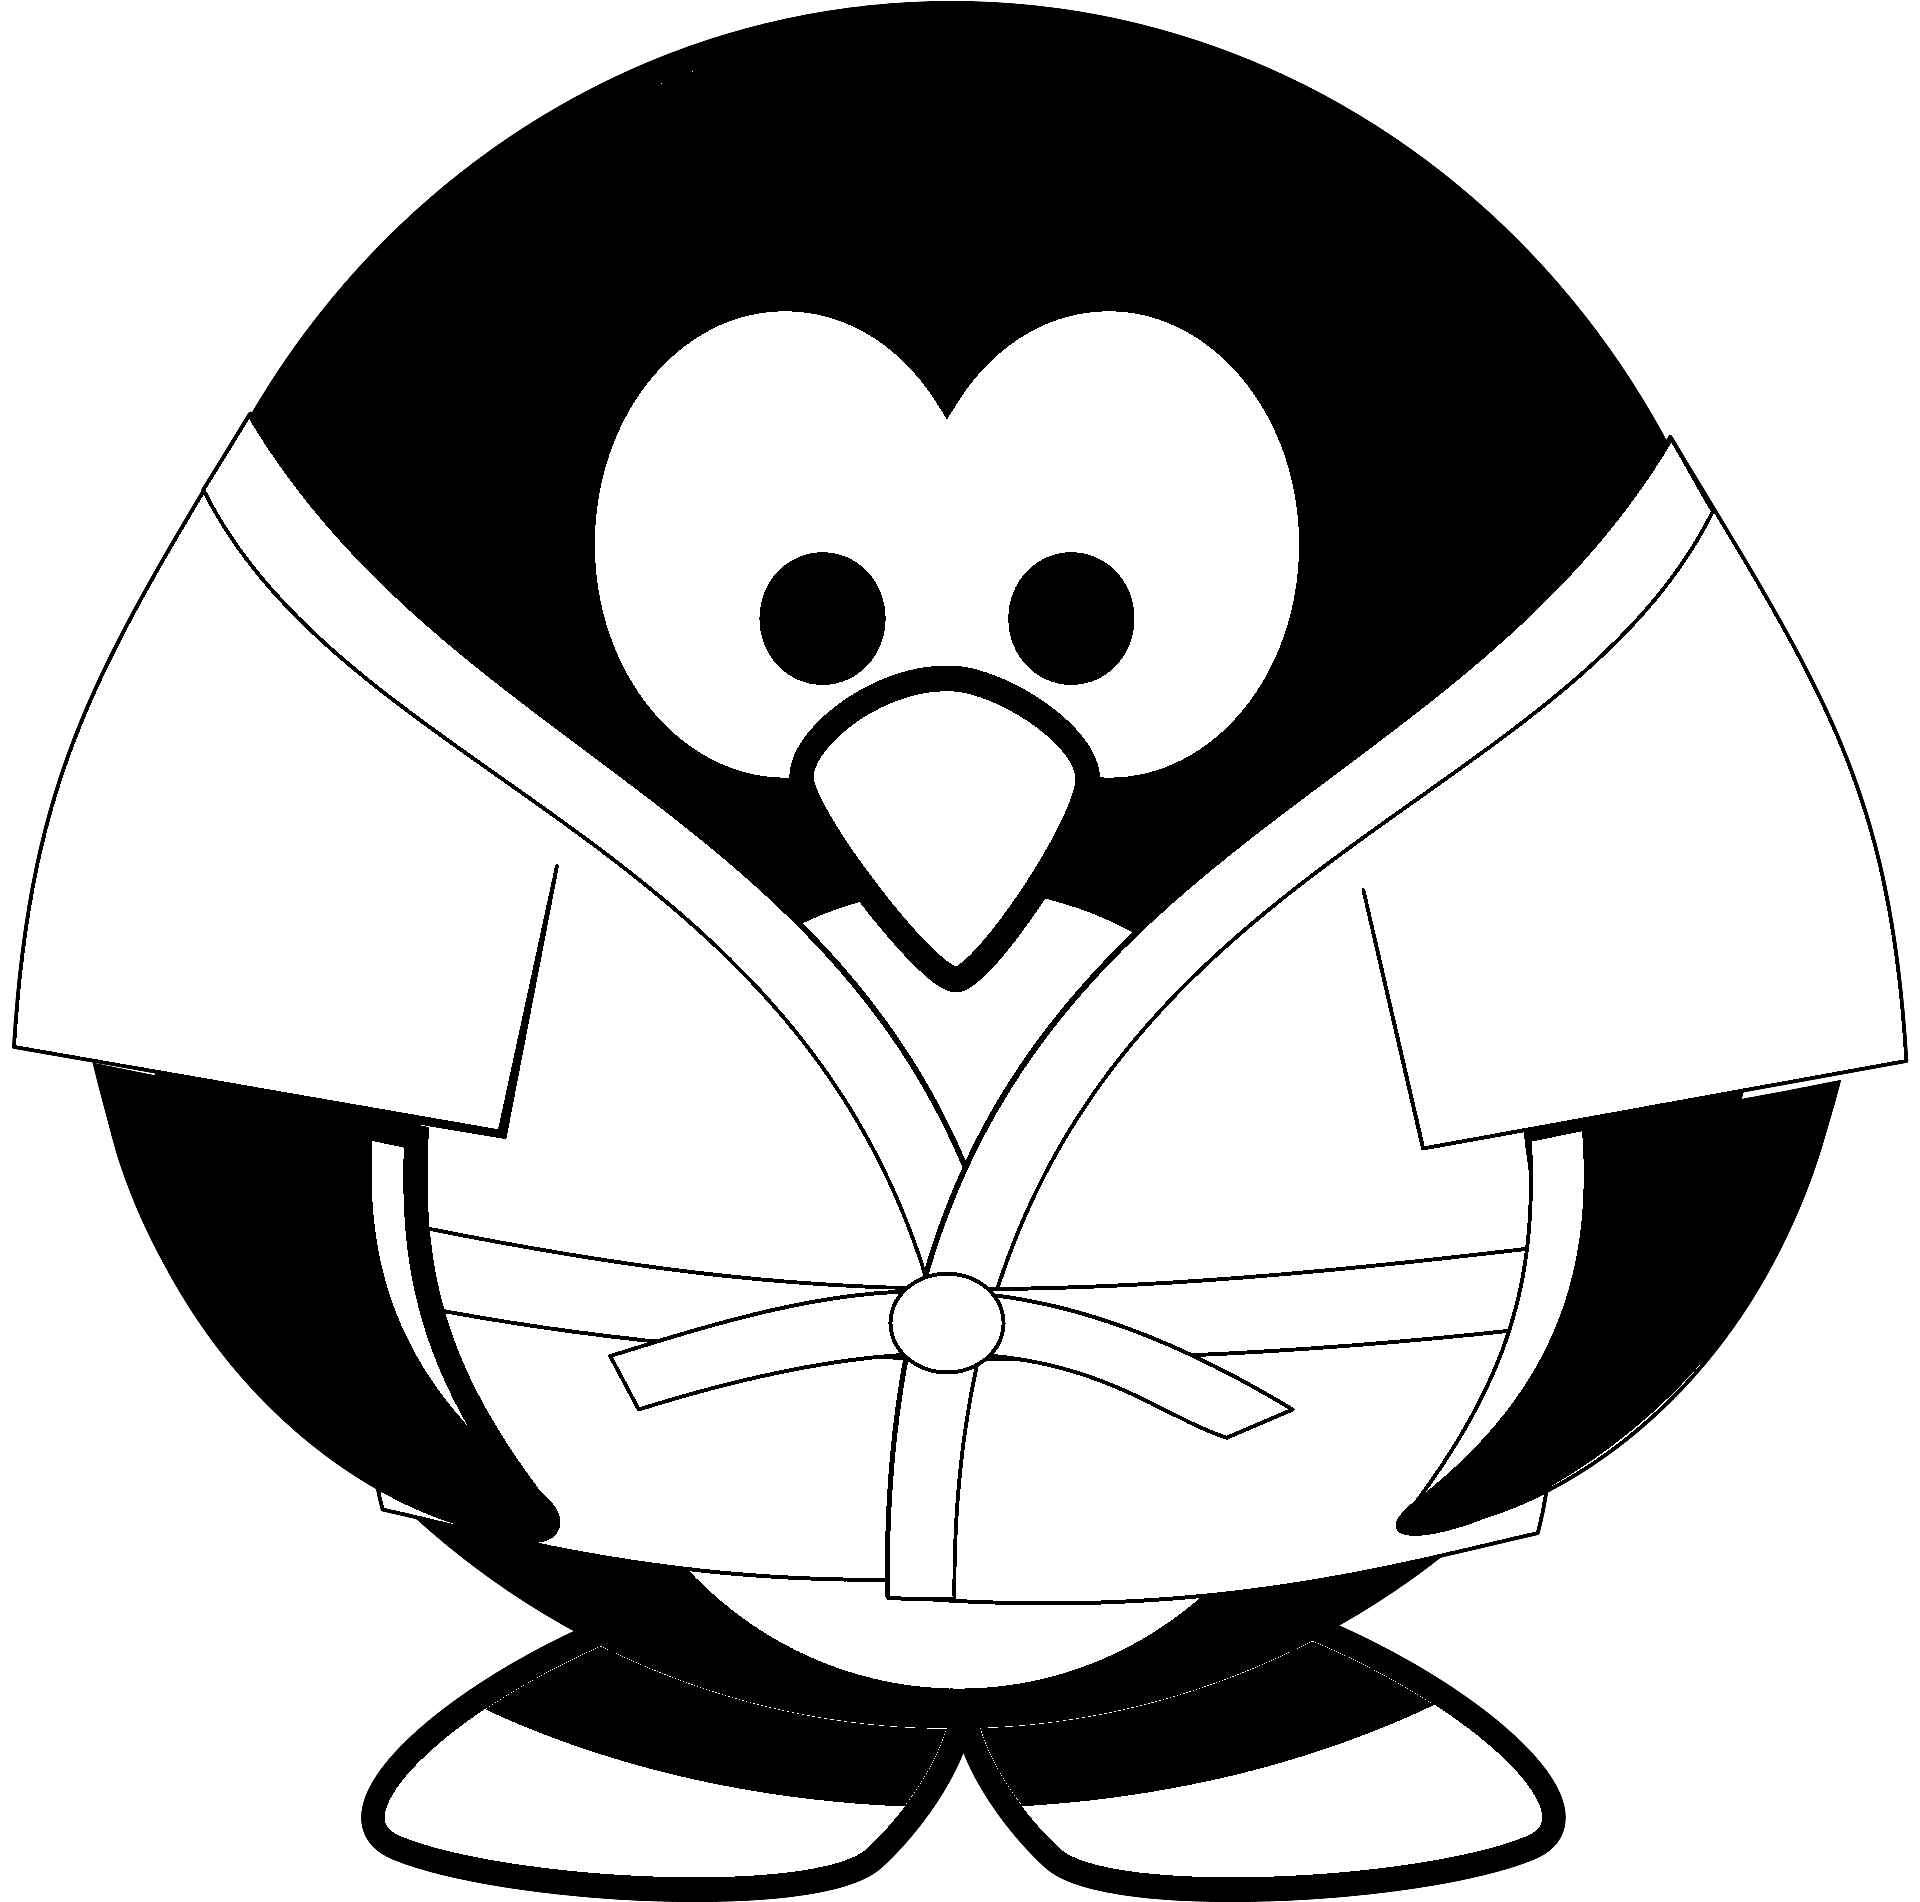 Coloring page of a penguin